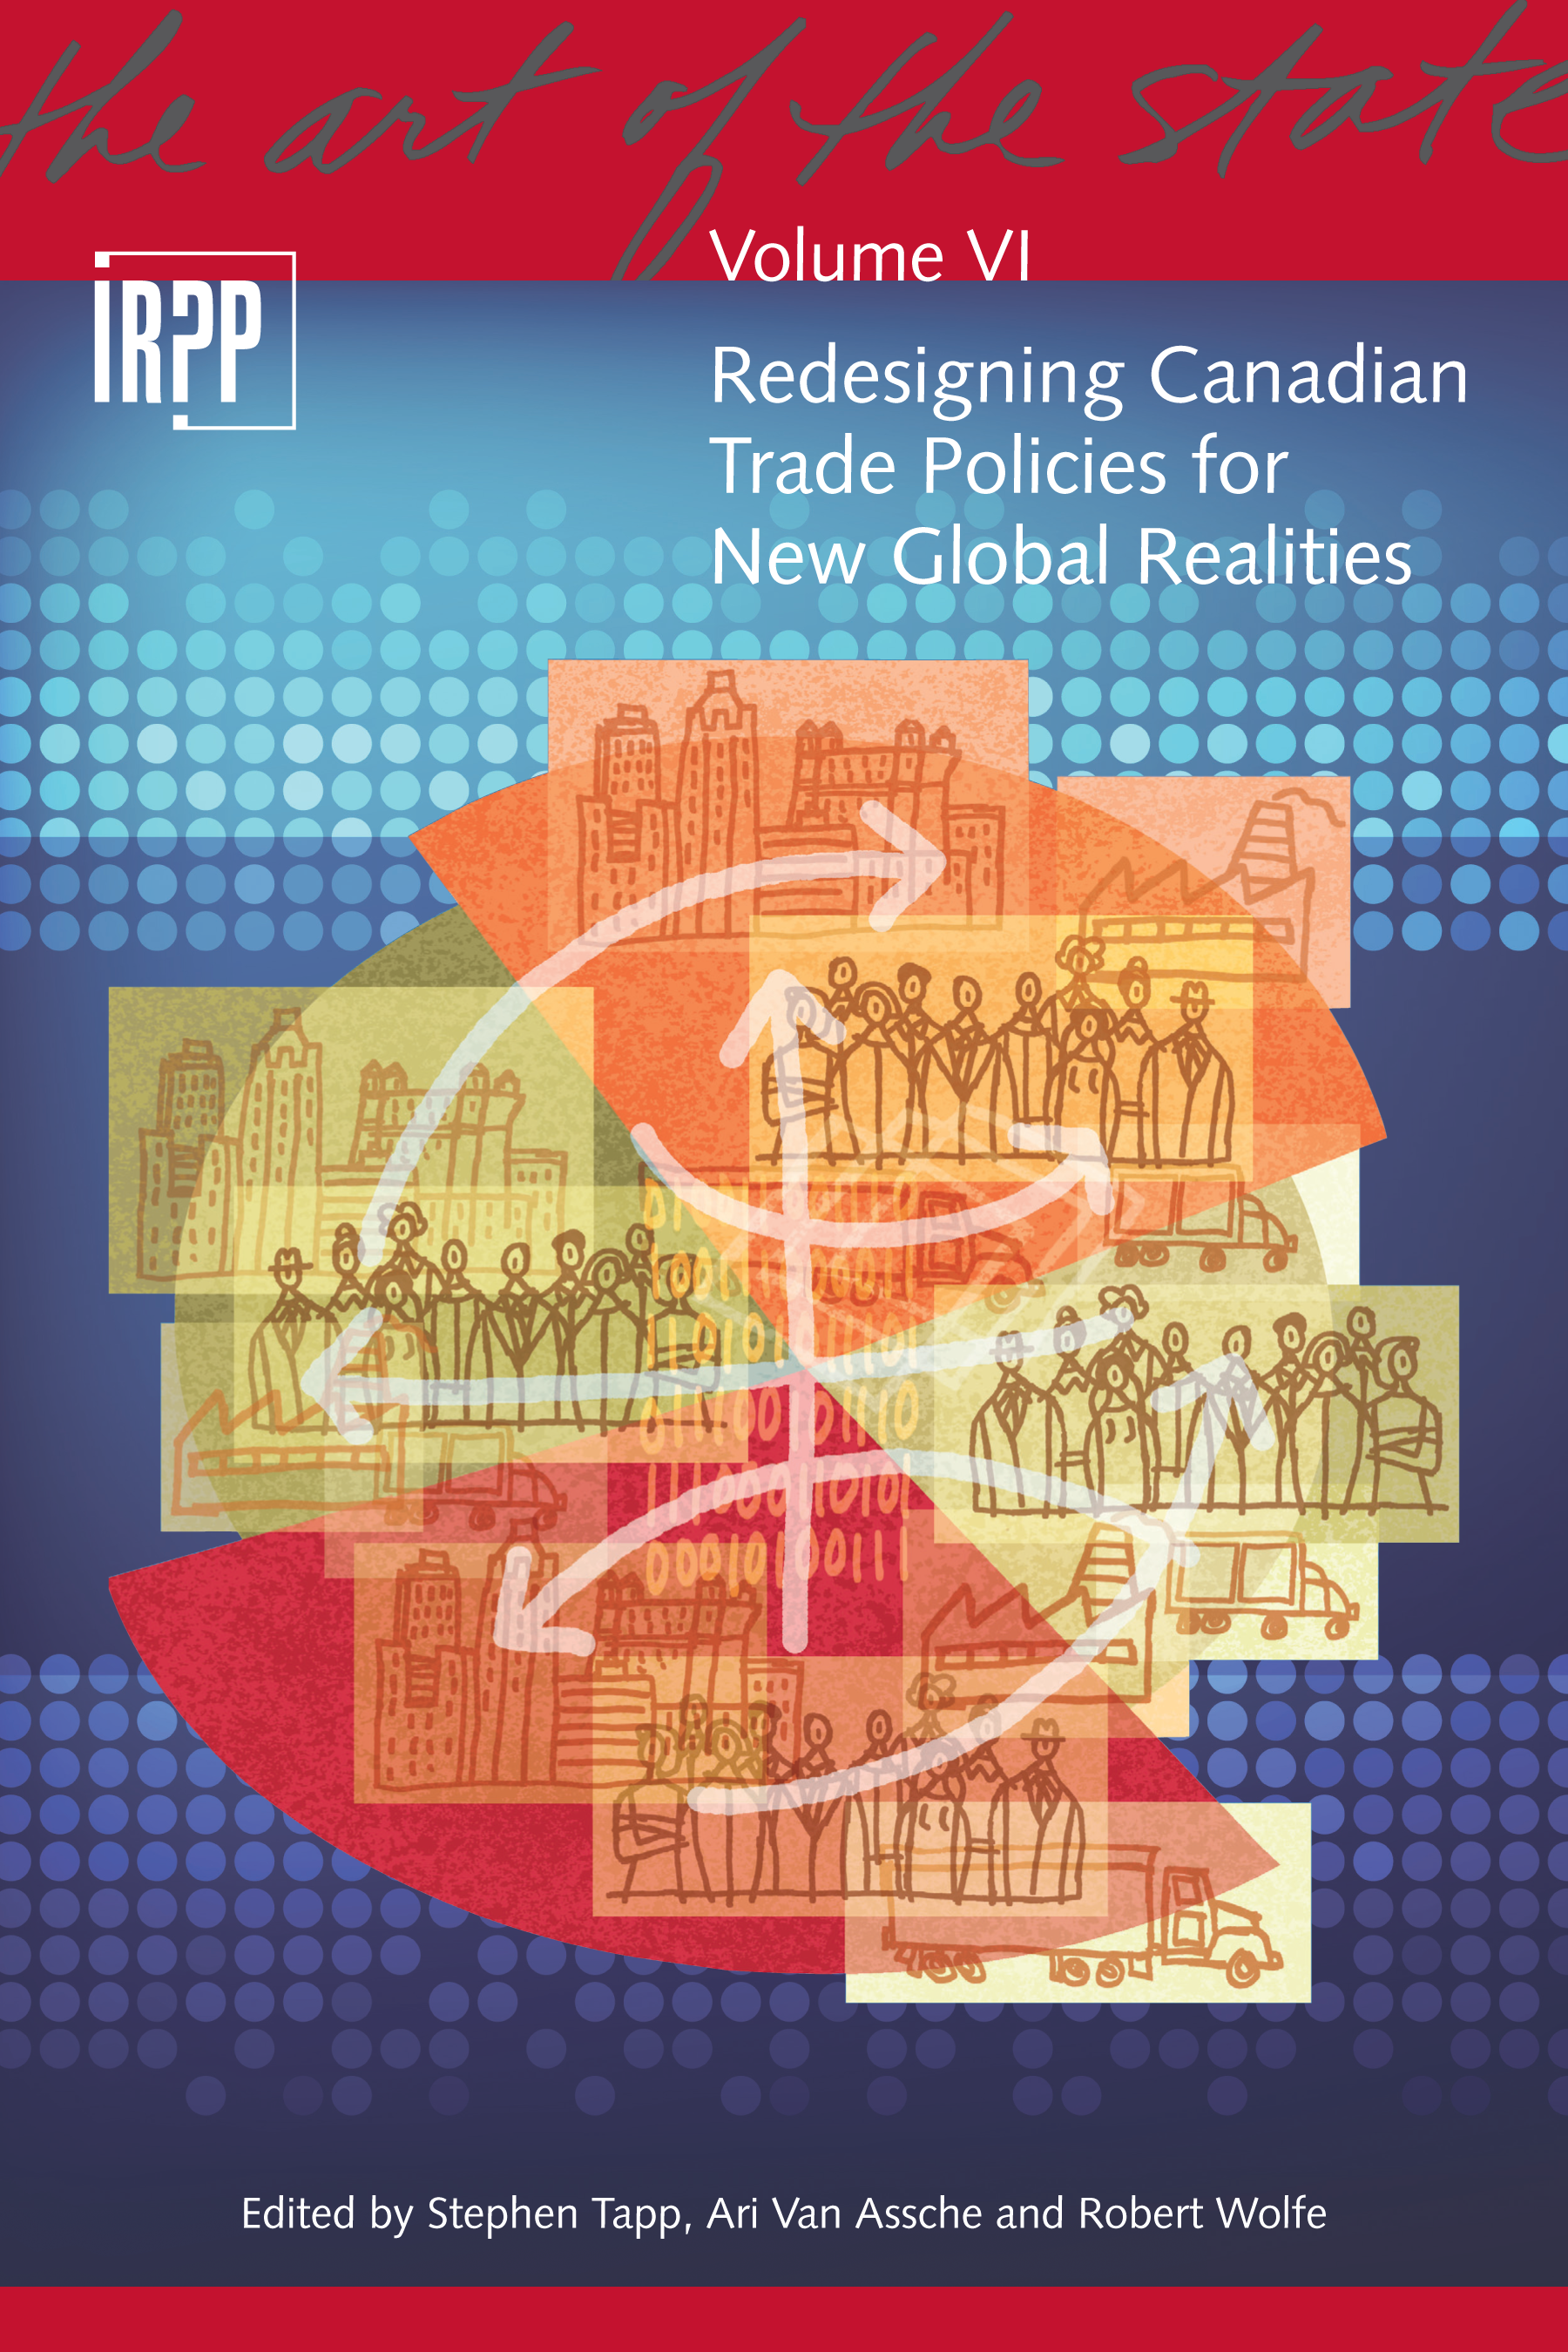 Redesigning Canadian Trade Policies for New Global Realities